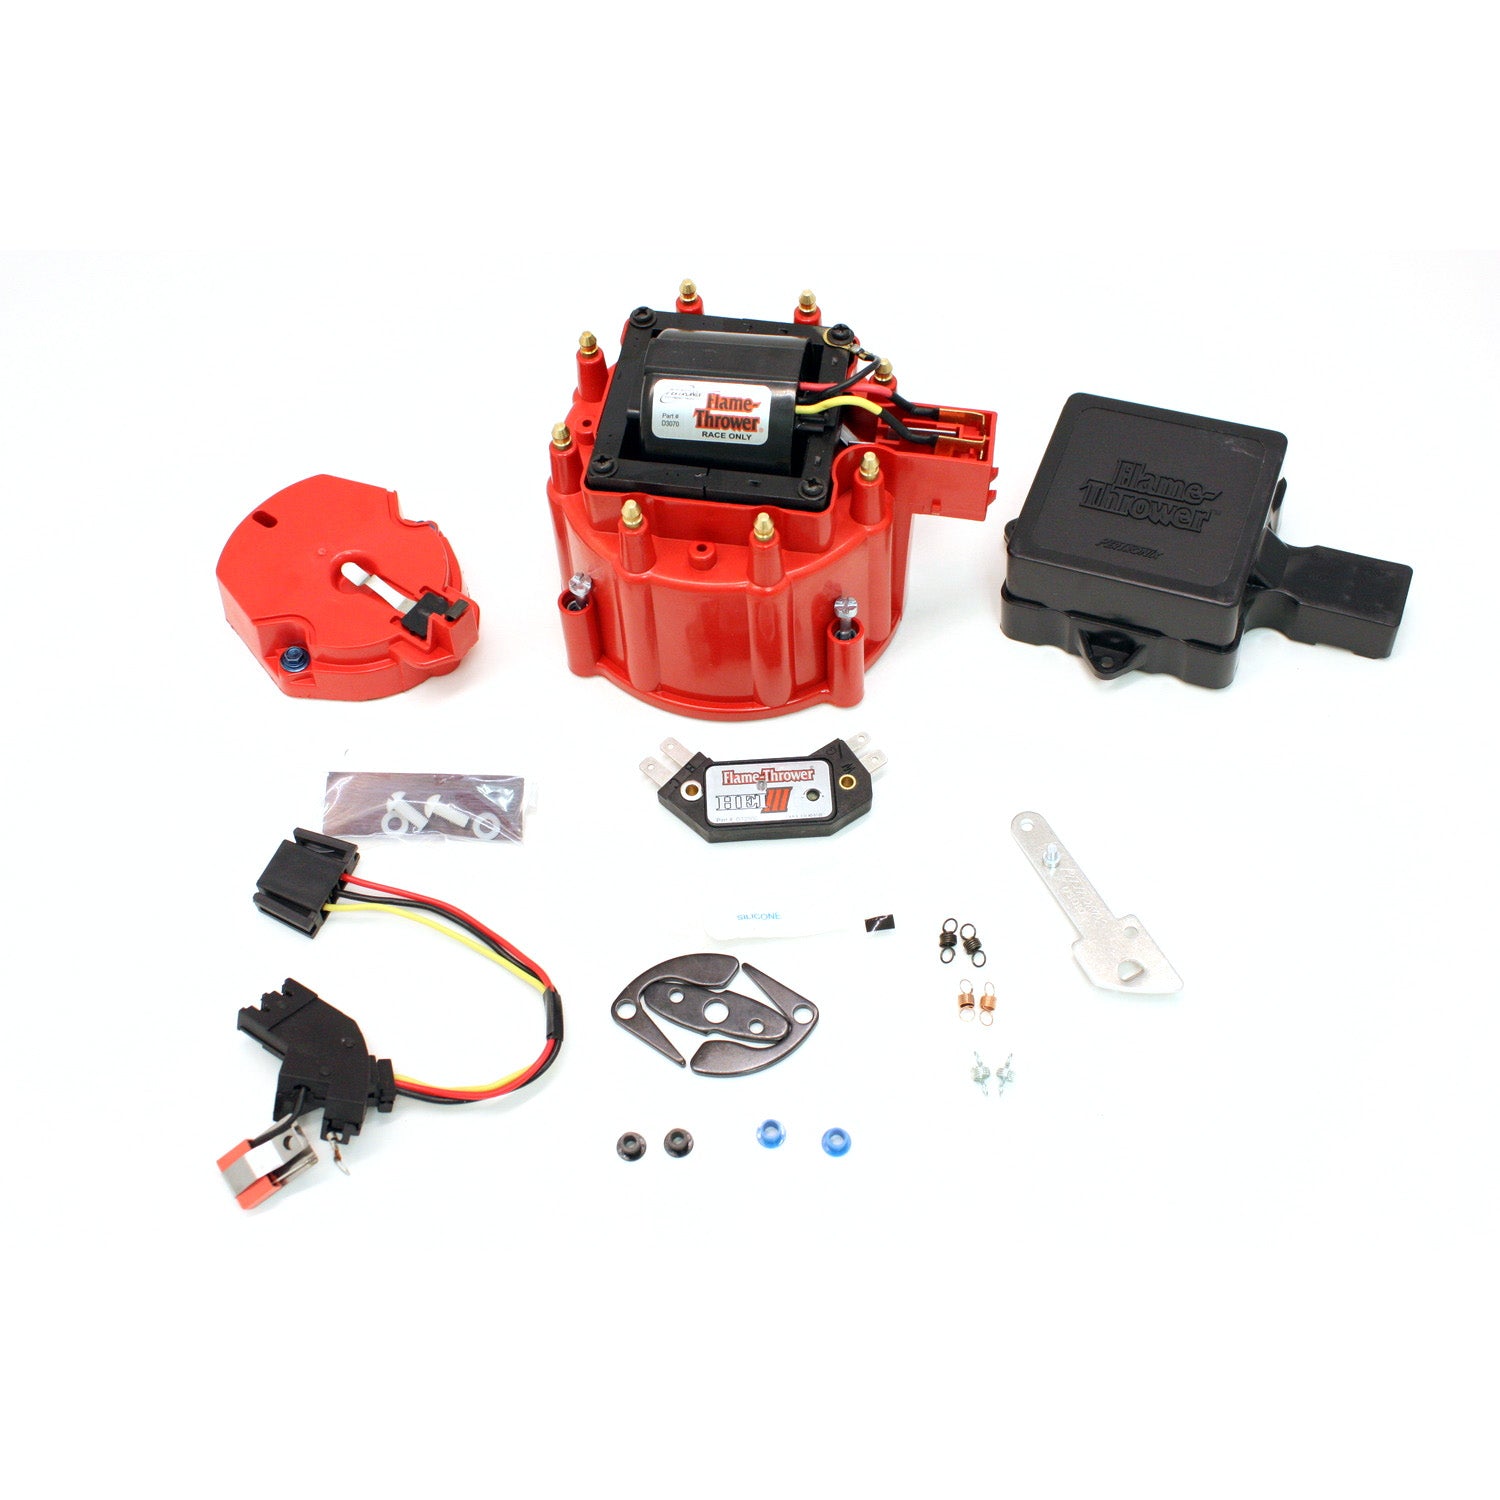 PerTronix D78071 Flame-Thrower HEI III Race Chevrolet Tune Up Kit Red cap with multiple sparks and an adjustable digital rev limiter